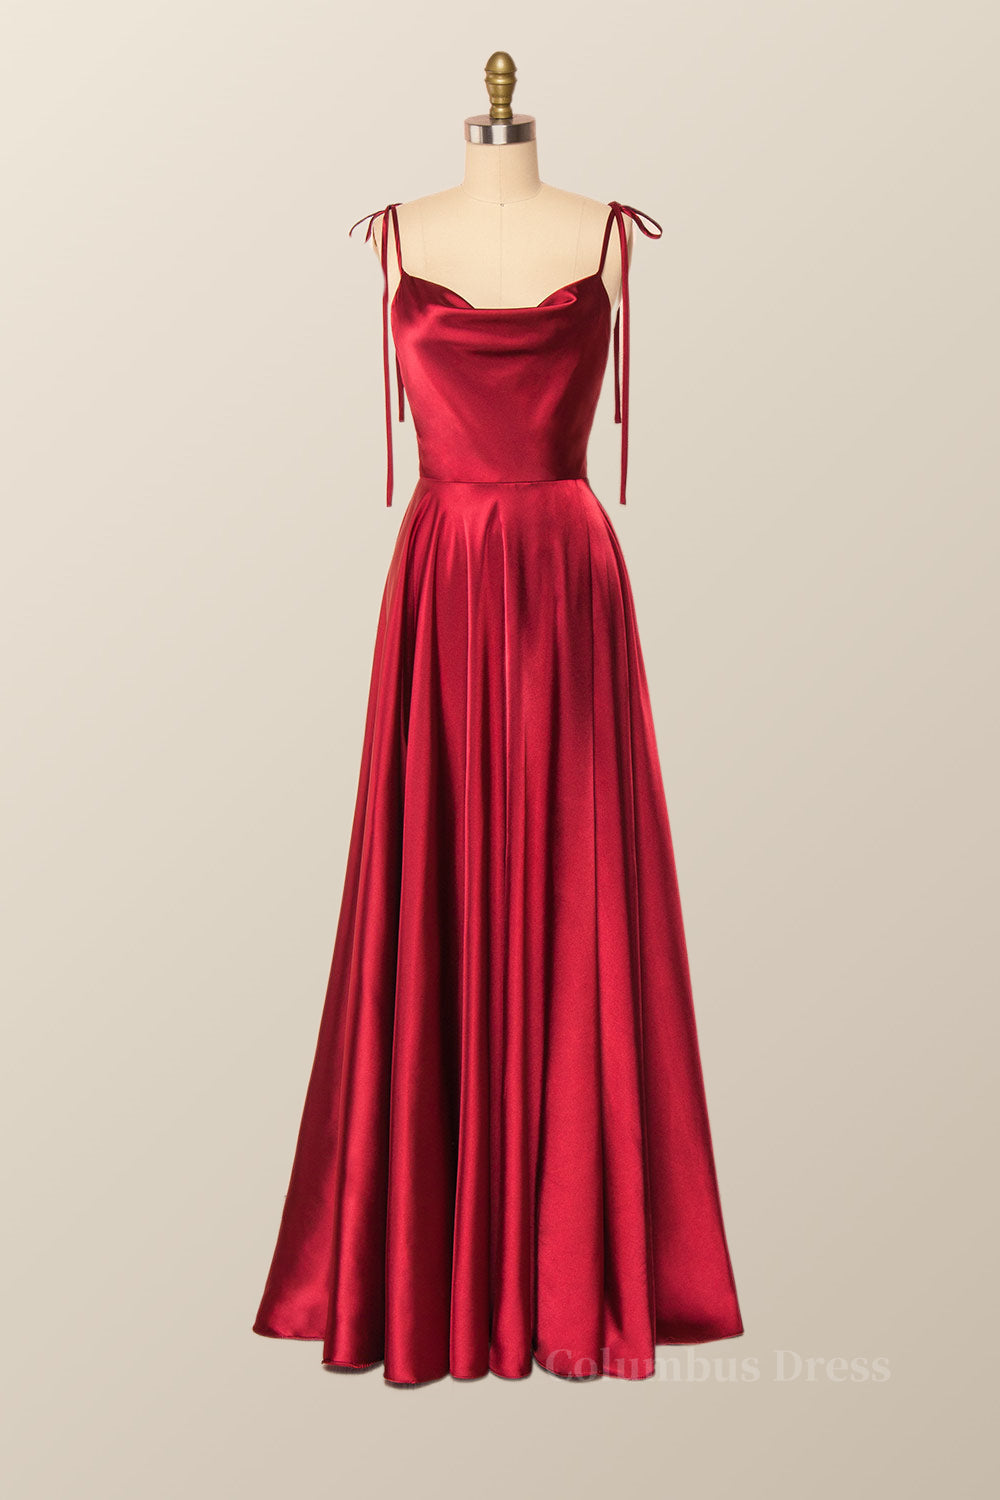 Party Dress Mini, Princess Red A-line Long Dress with Tie Shoulders